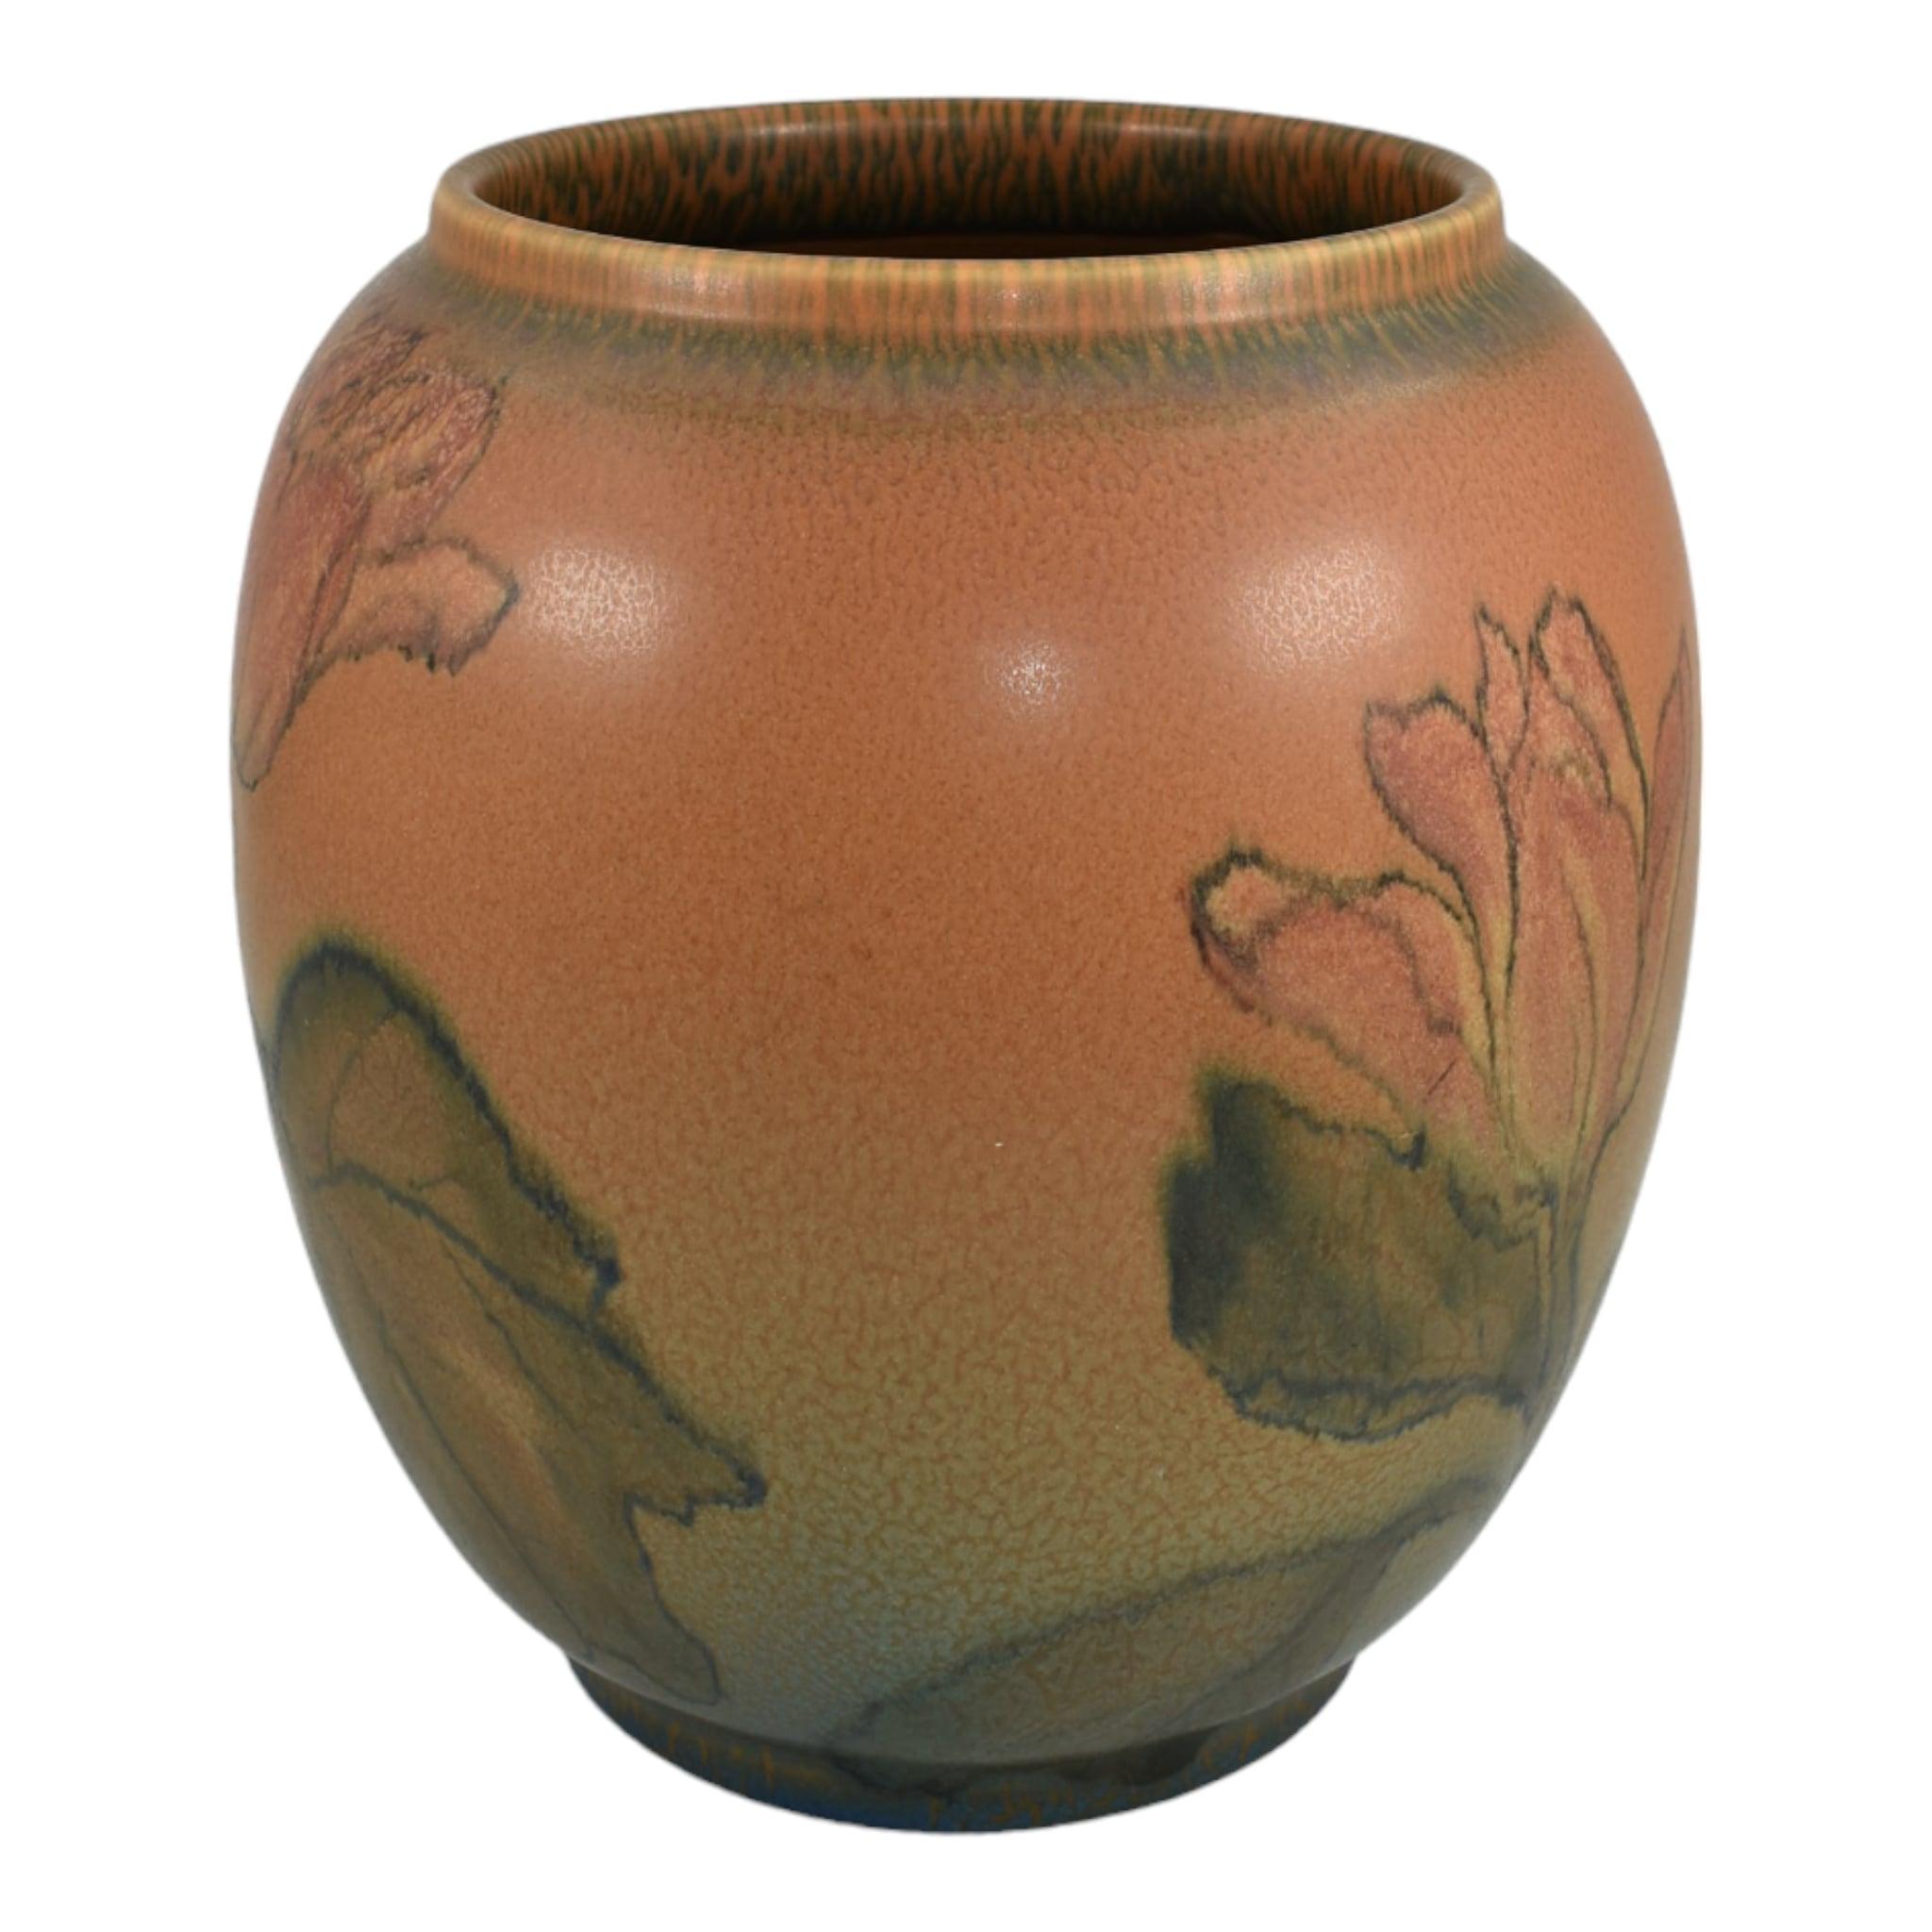 Rookwood 1924 Vintage Art Pottery Orange Vellum Ceramic Vase 2245 (Lincoln)
Large and stunning, bulbous vase with an exceptional floral design hand painted by Elizabeth Lincoln in 1924
Excellent original condition. No chips, cracks, damage or repair